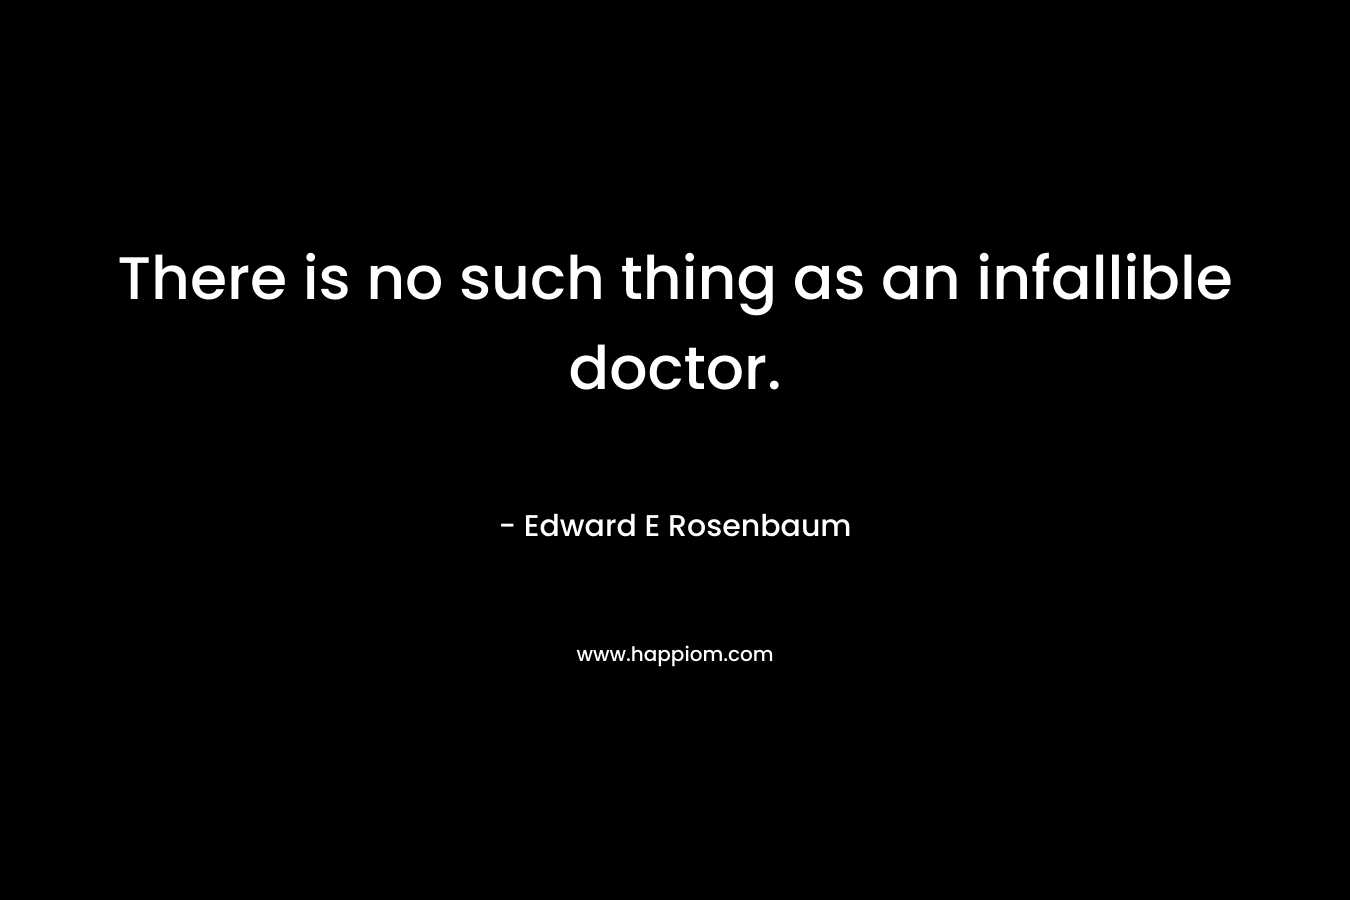 There is no such thing as an infallible doctor. – Edward E Rosenbaum